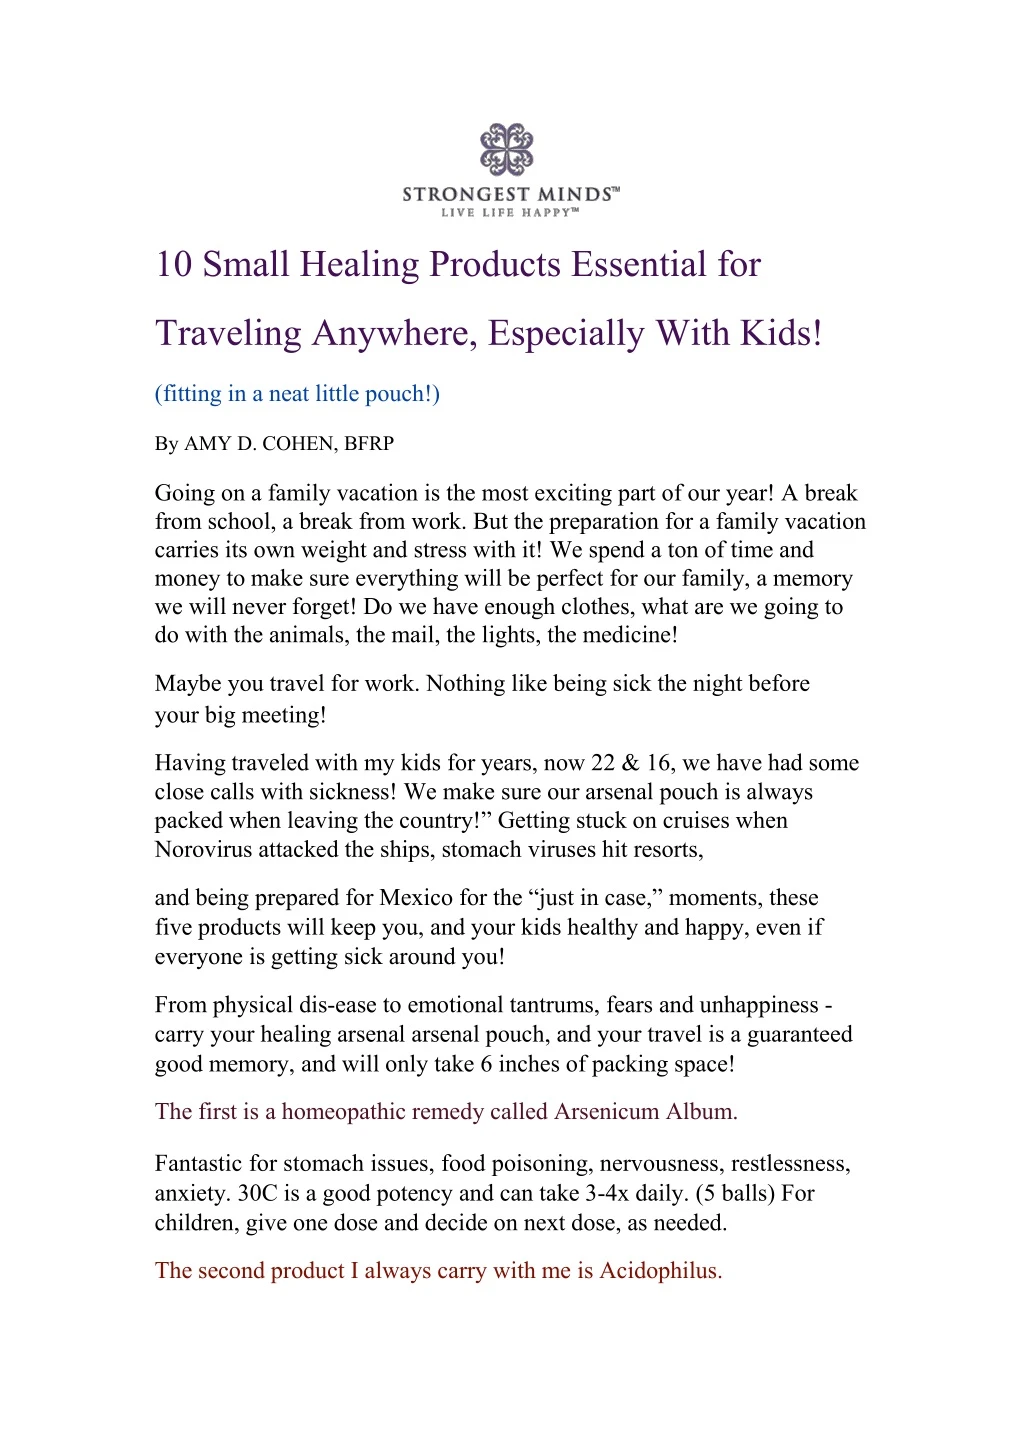 10 small healing products essential for